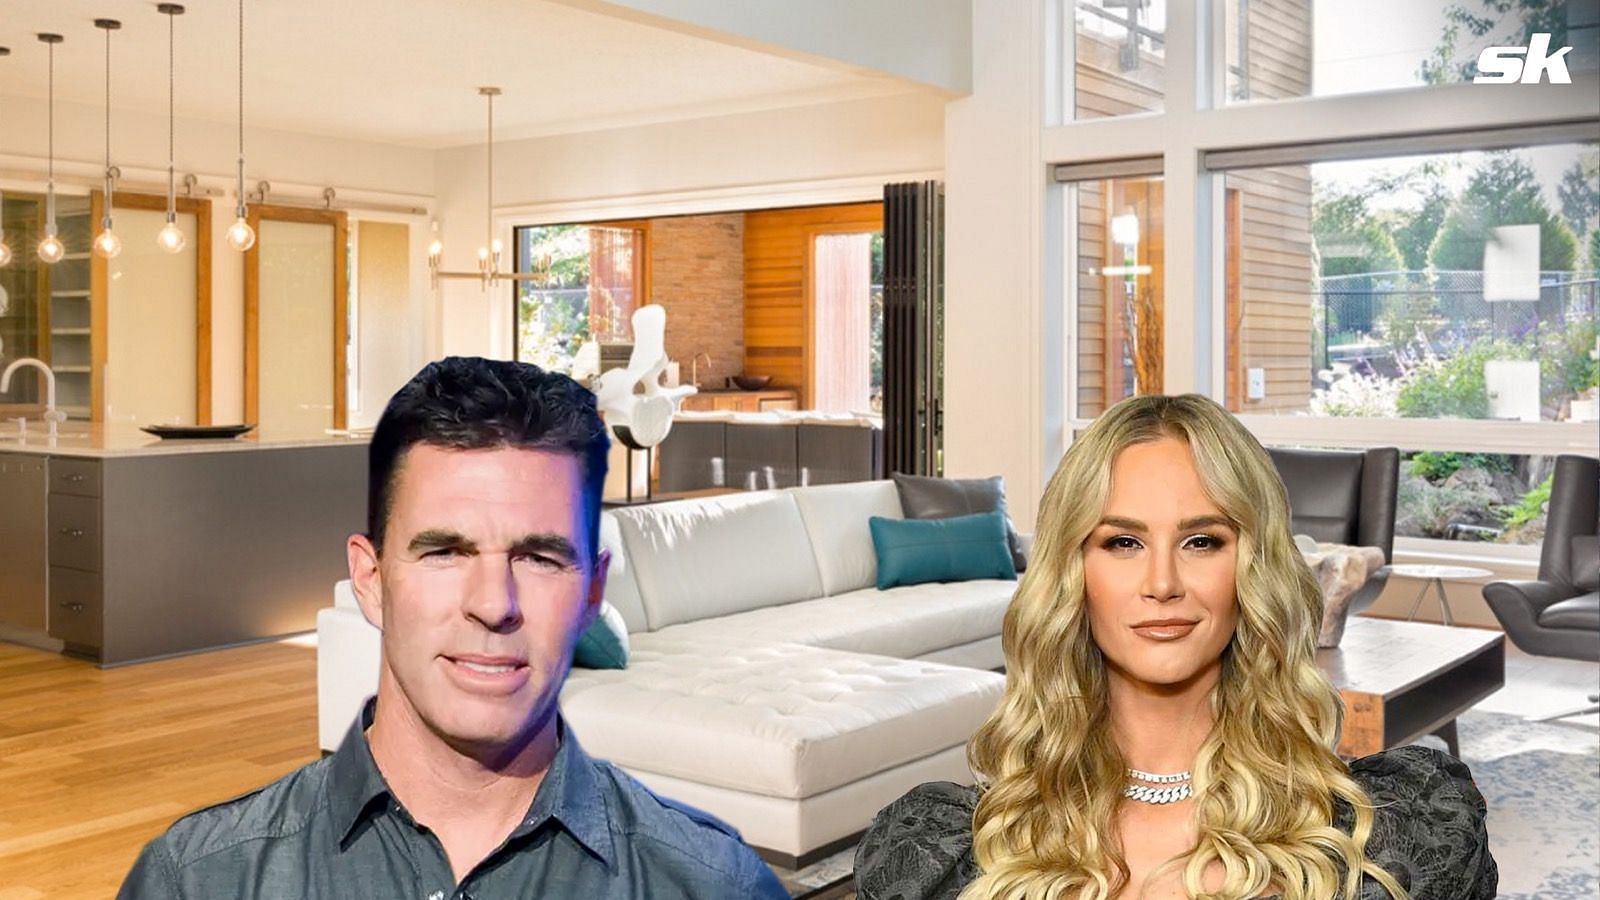 Jim Edmonds just got soooo shady about ex-wife Meghan King's whirlwind  wedding — and the quotes are WILD. 🍿🍿 Can't say we're shocked about…